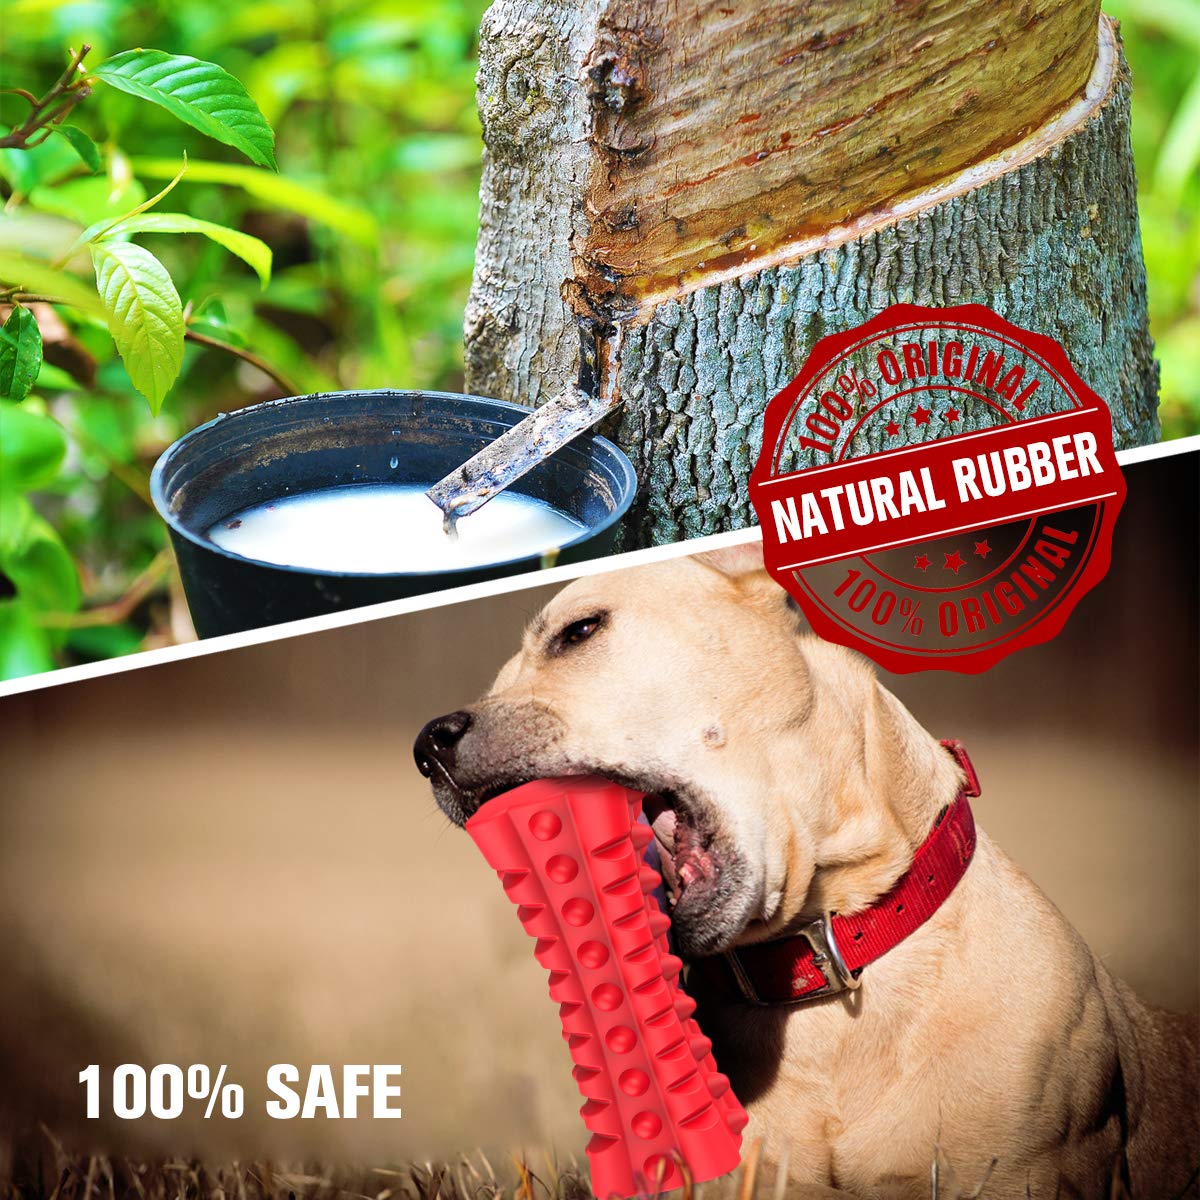 Stick Toys Puppy Chew Toys with Non-Toxic Natural Rubber